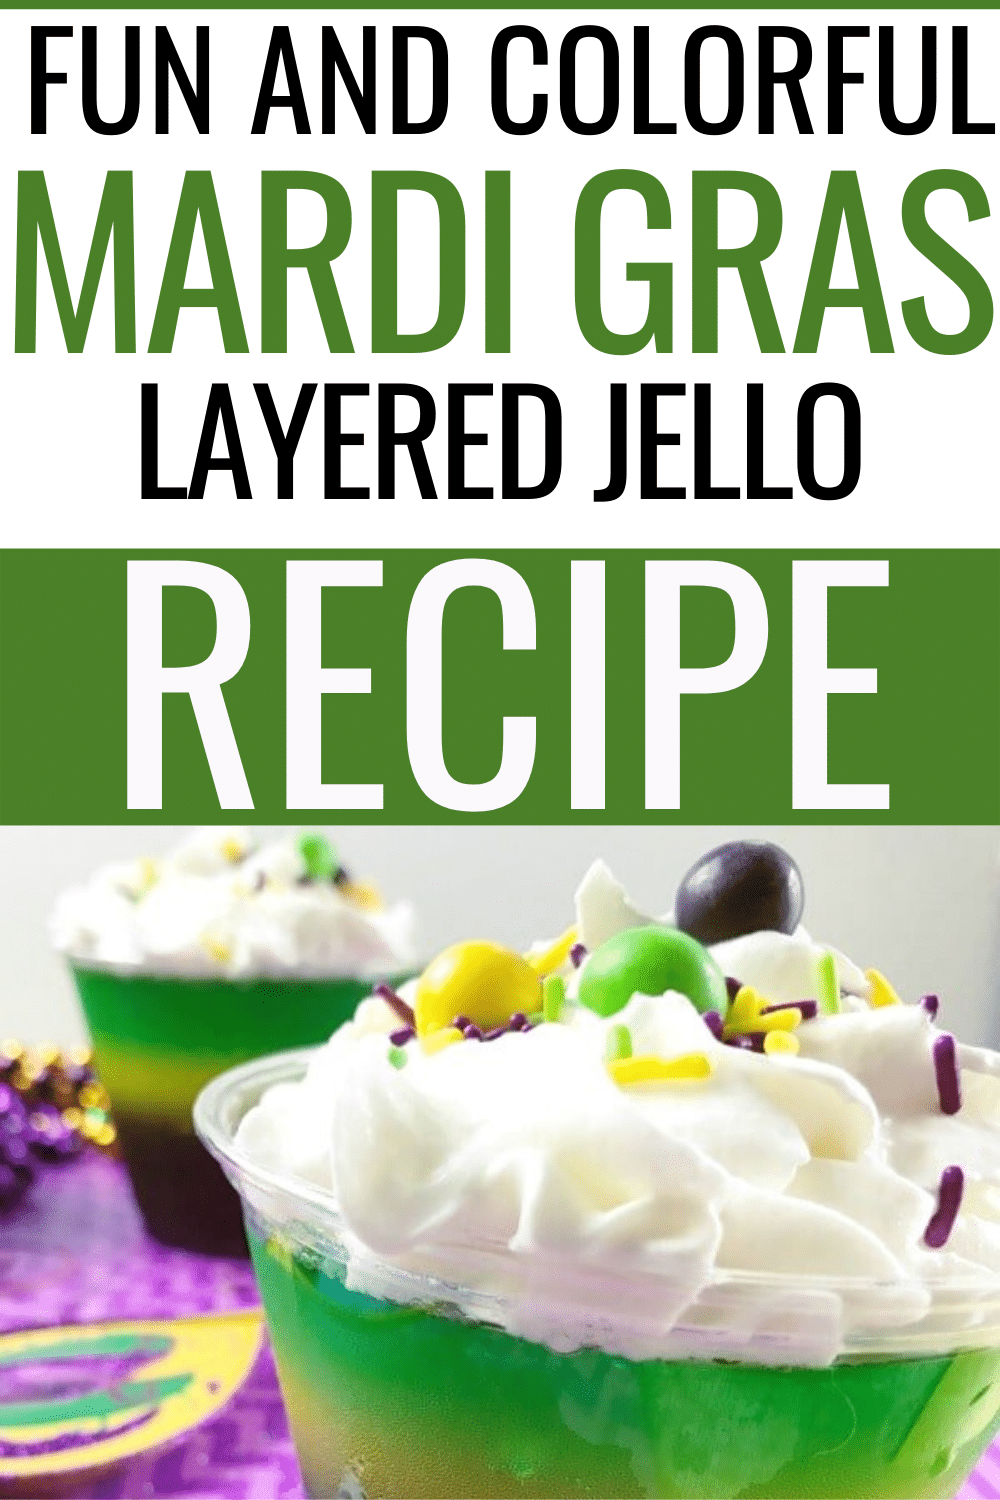 This Layered Jello for Mardi Gras is the perfect individual treat for Fat Tuesday. They're colorful, easy to make and great for parties. #mardigras #fattuesday #jello #layeredjello via @wondermomwannab